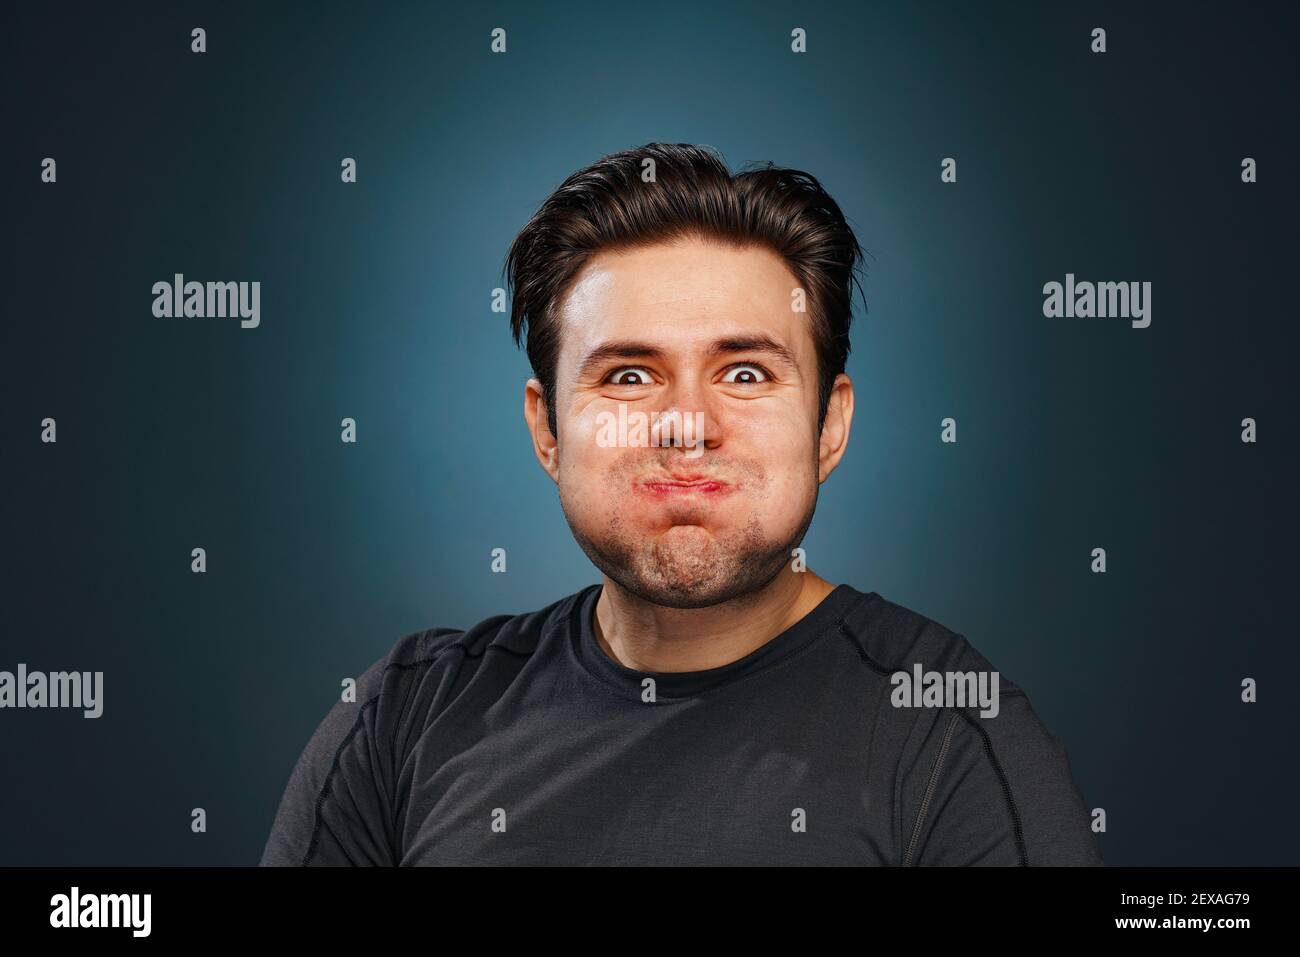 Man emotional studio portrait. Burst out laughing emotions on face. Stock Photo